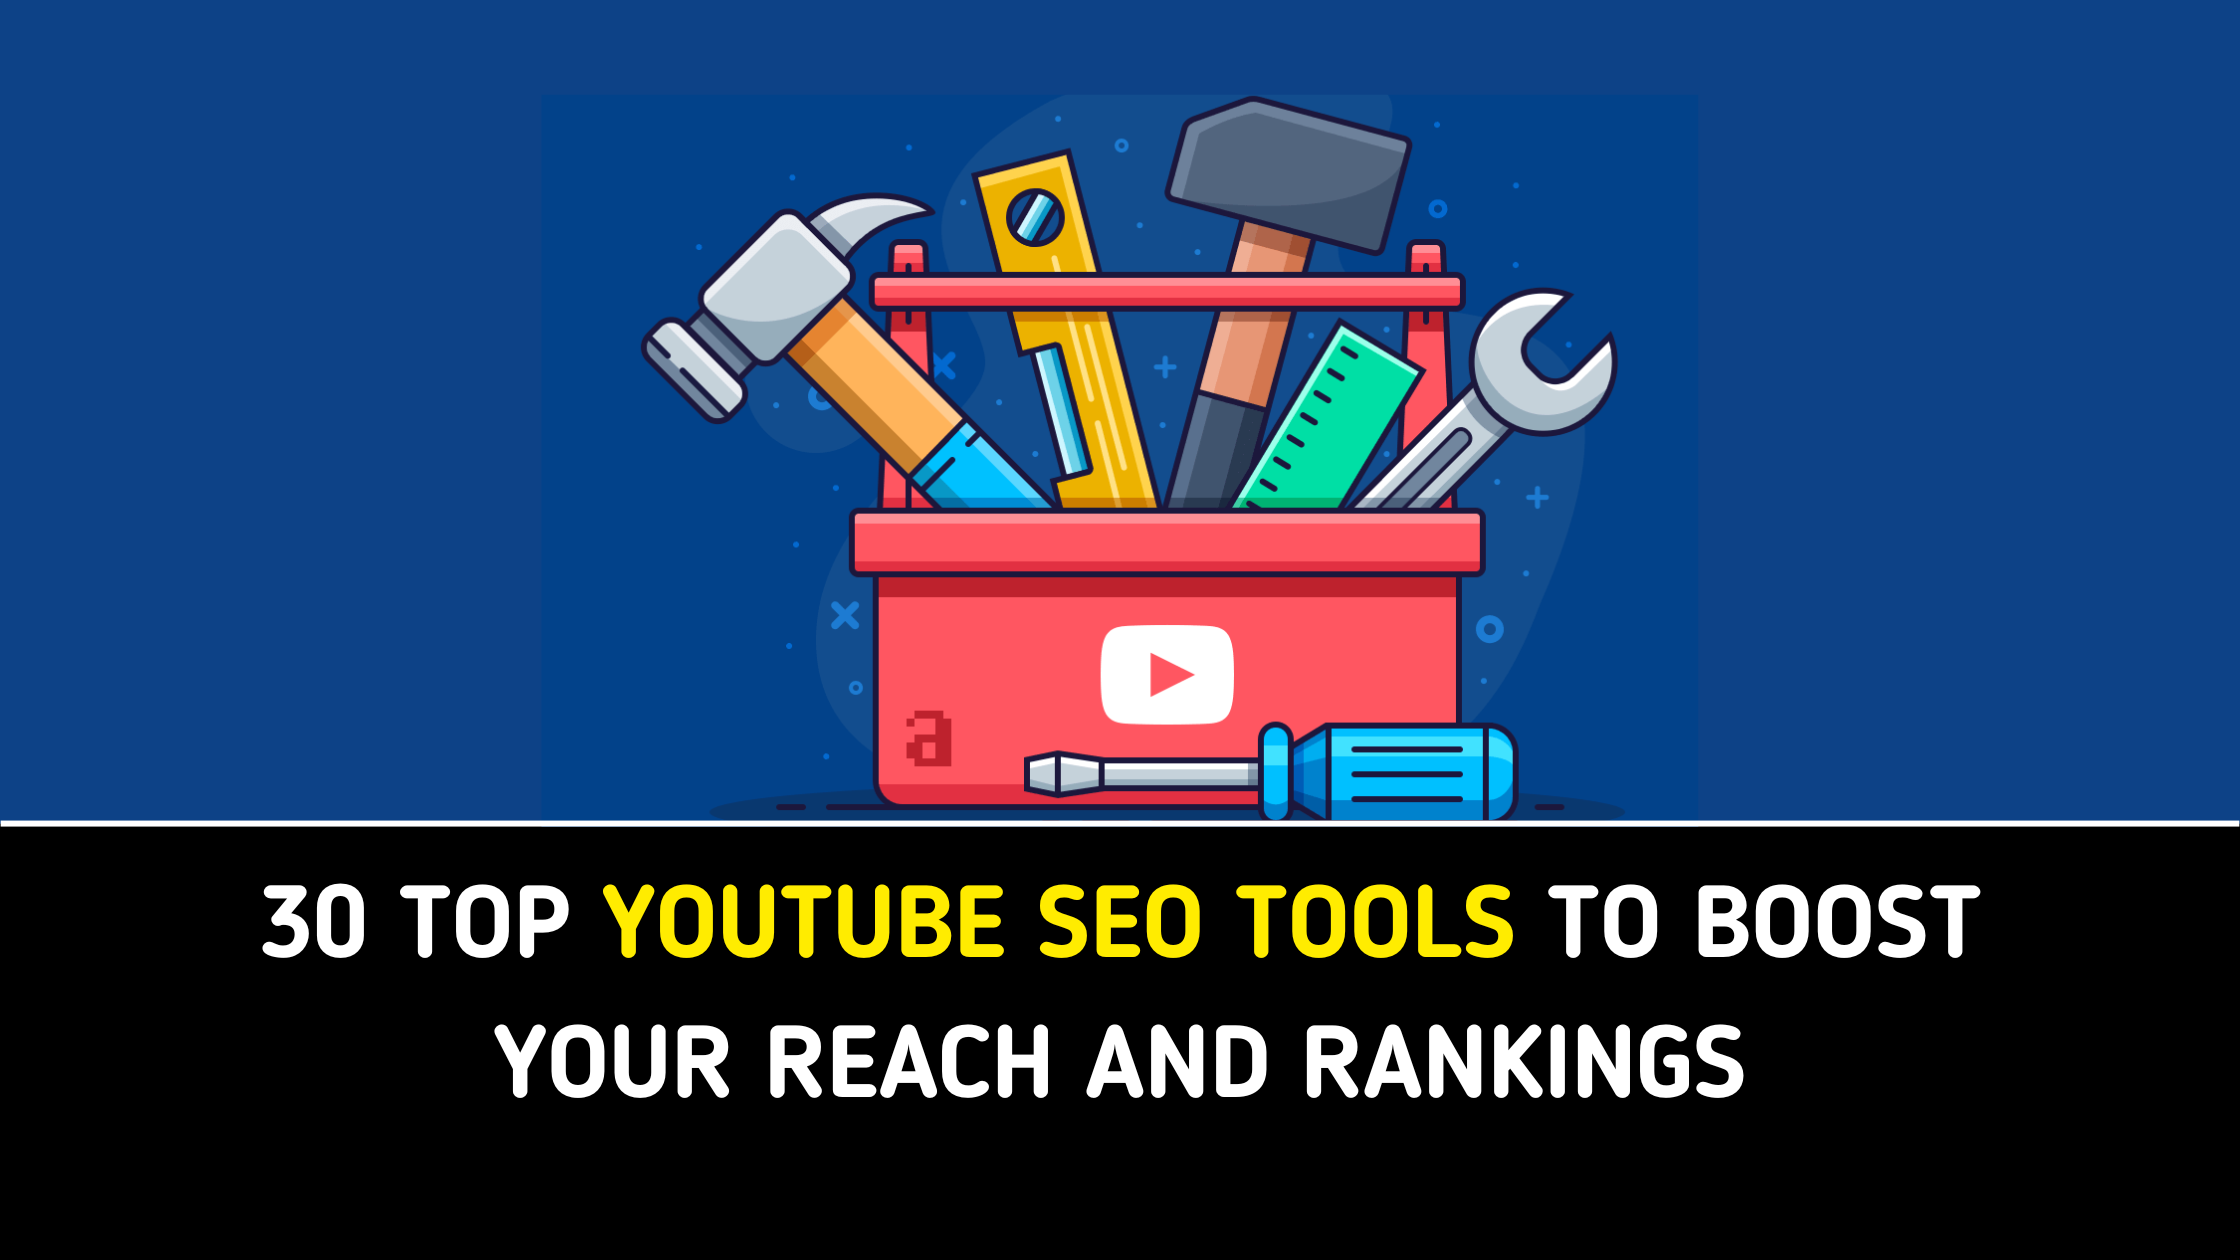 30-top-youtube-seo-tools-to-boost-your-reach-and-rankings